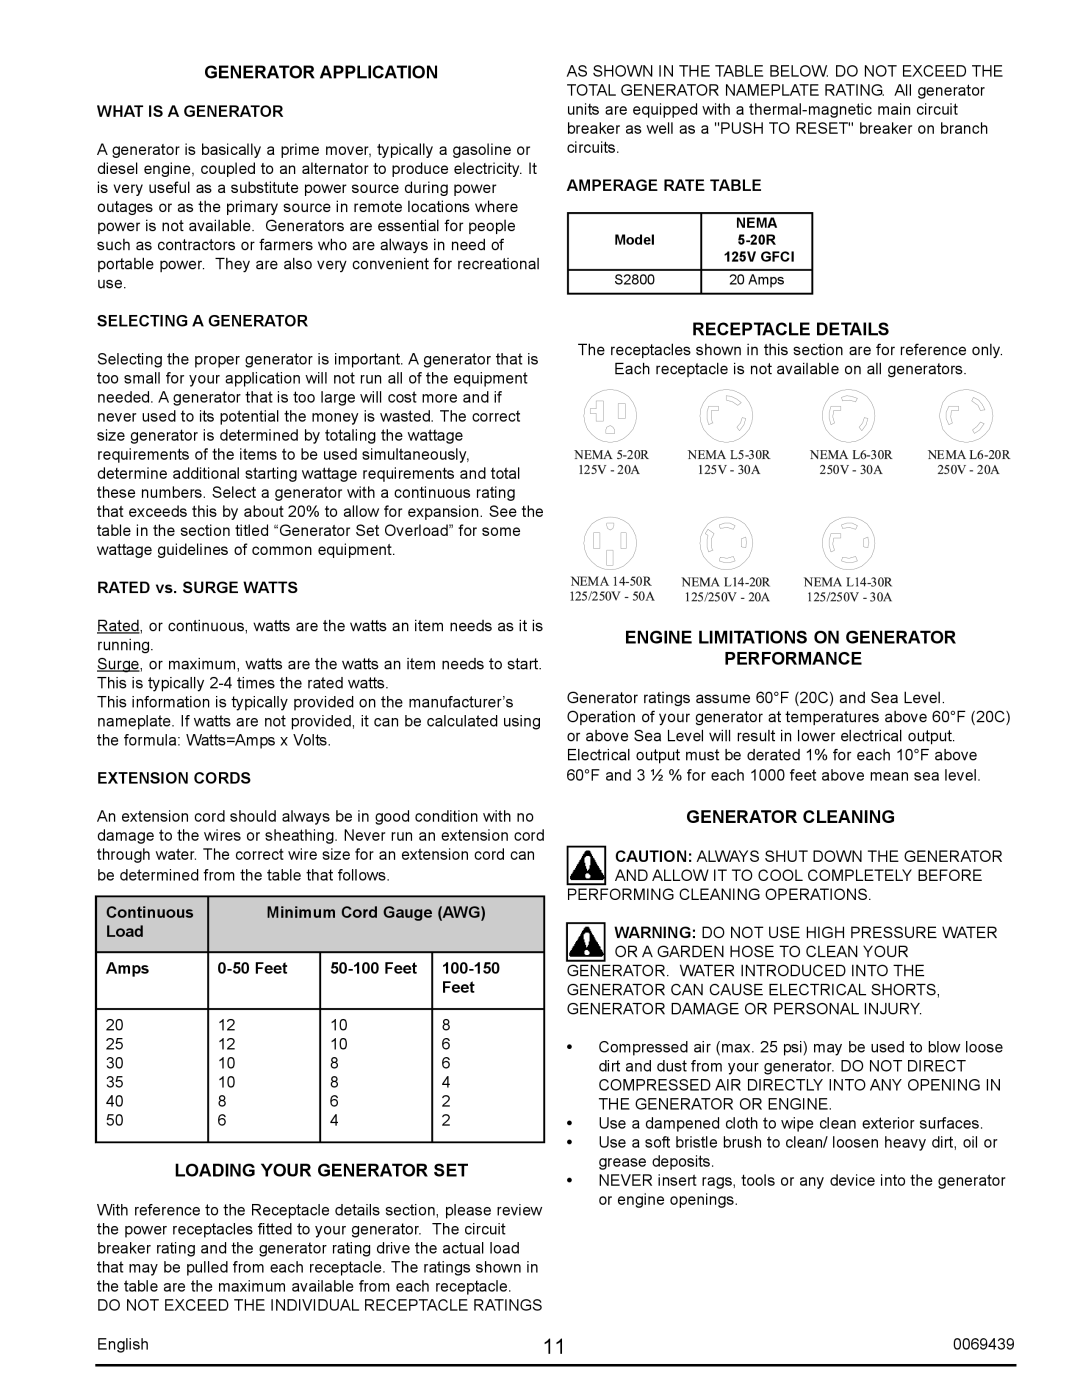 Sears S2800 What Is A Generator, Selecting A Generator, Amperage Rate Table, RATED vs. SURGE WATTS, Extension Cords, Load 